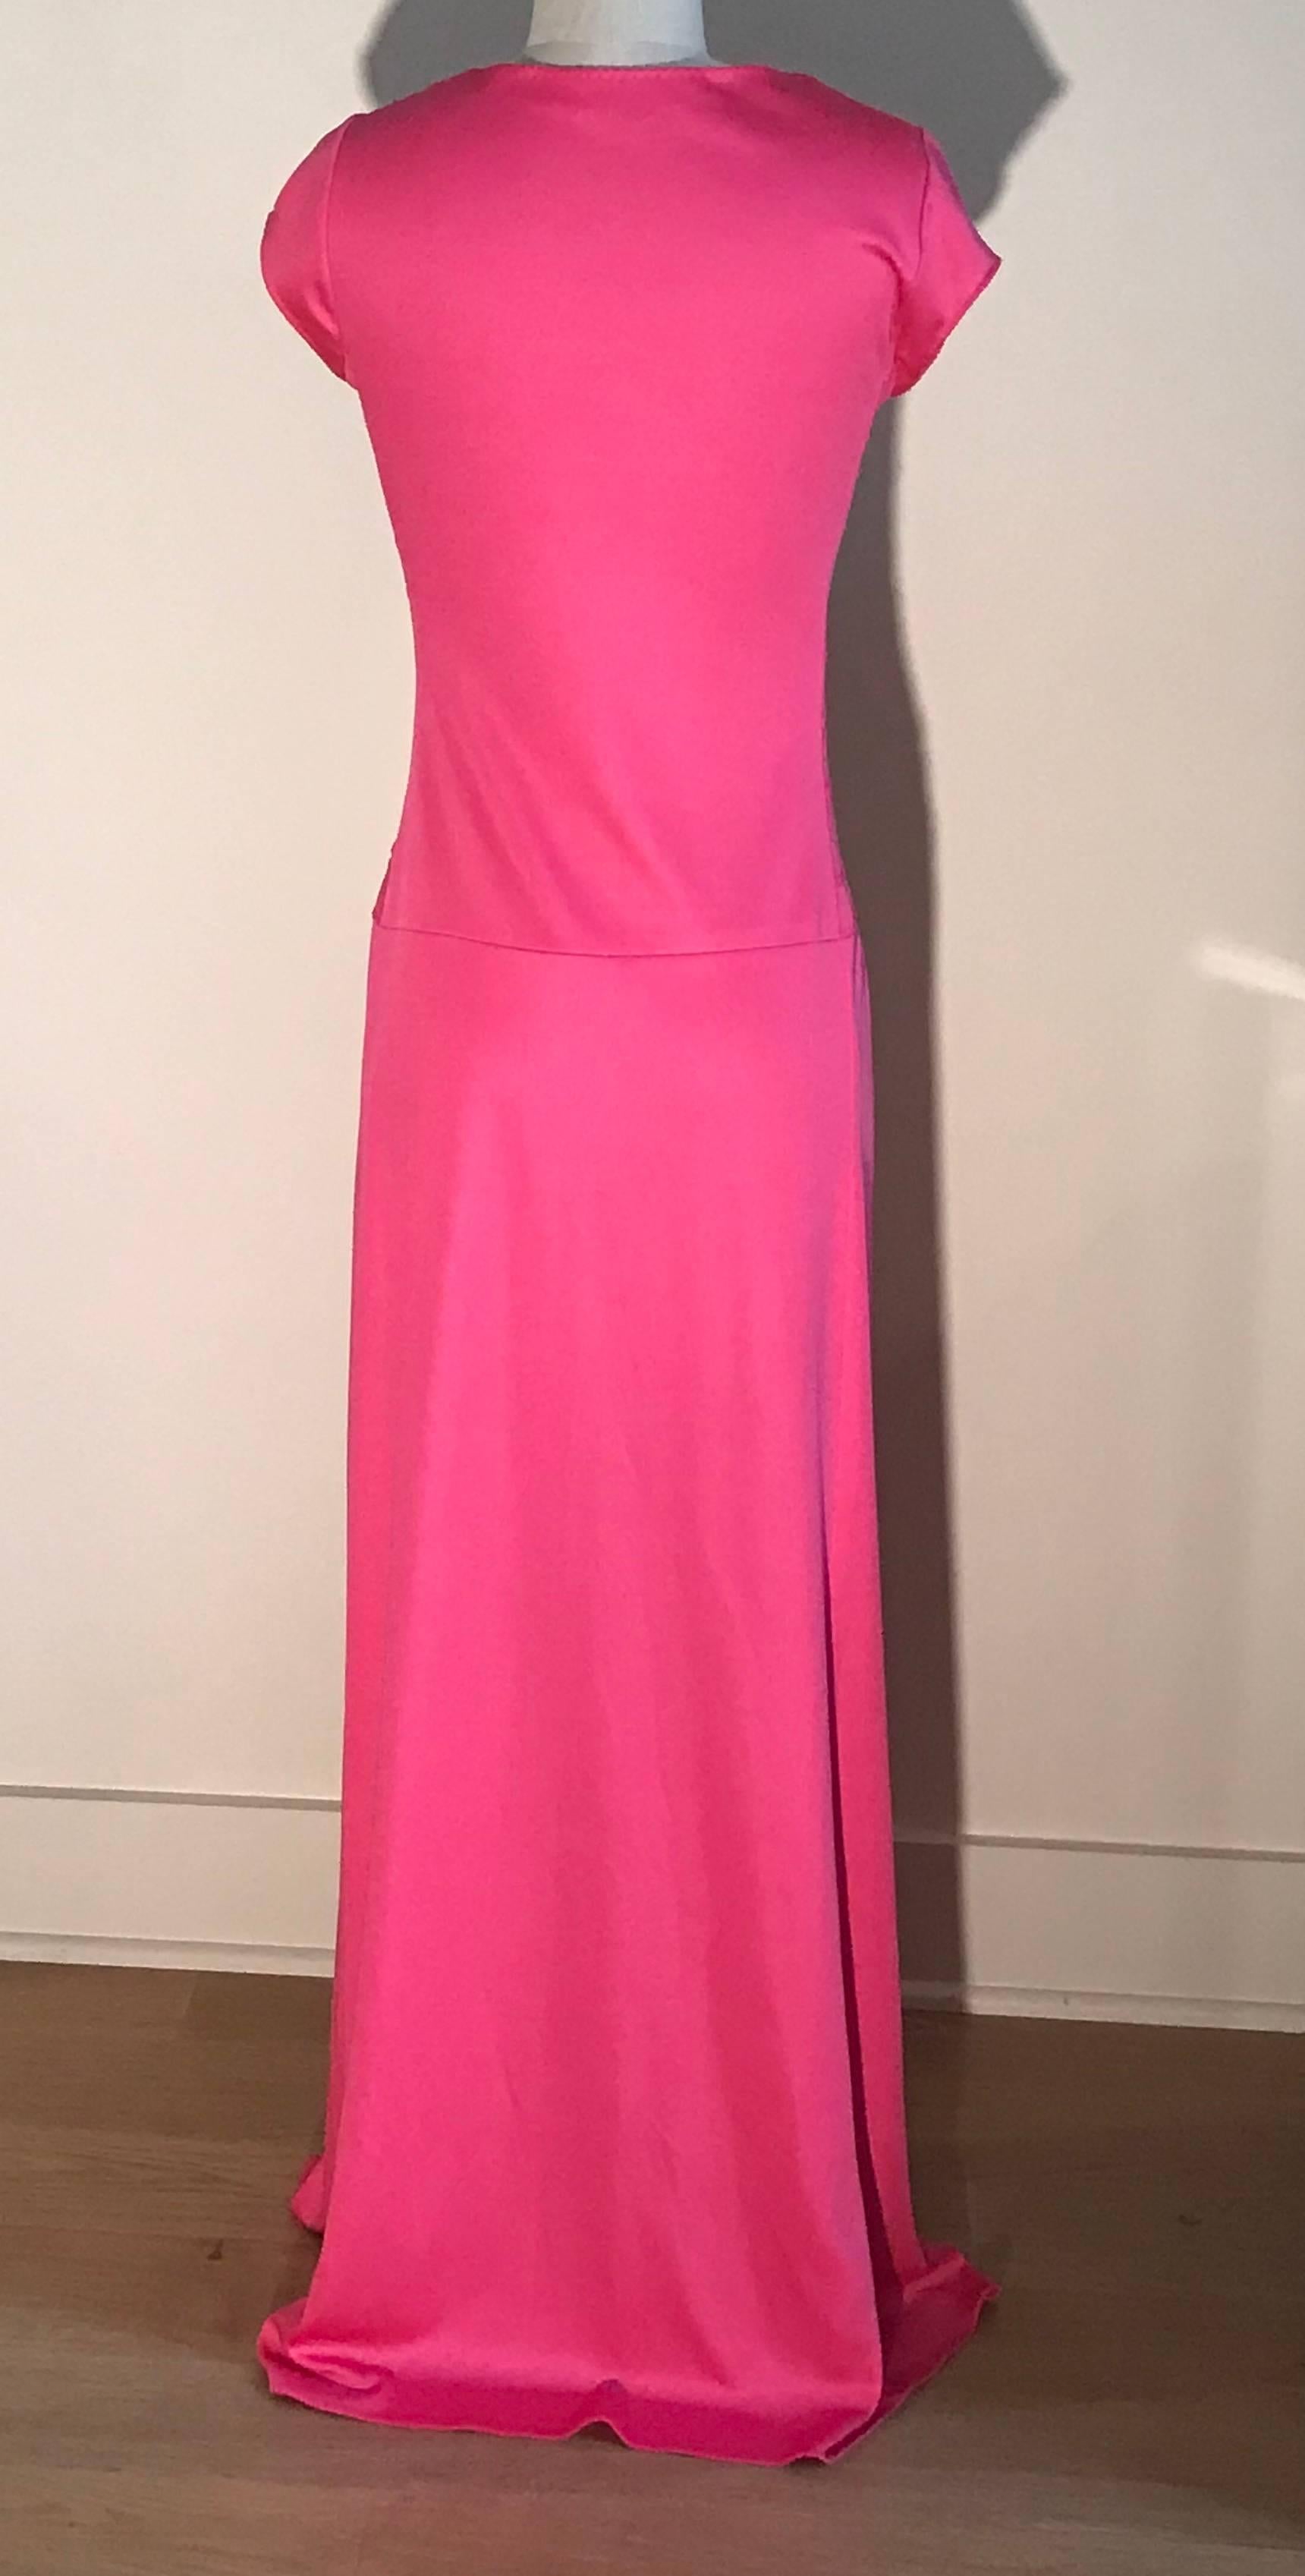 Stephen Burrows vintage 1970s pink maxi dress with scoop neck, cap sleeves,  and zig zagging strip detail at bodice. Signature lettuce edge at neck, hem, and cuffs. Skirt is an overlapping faux wrap style with a slit all the way up to expose a bit